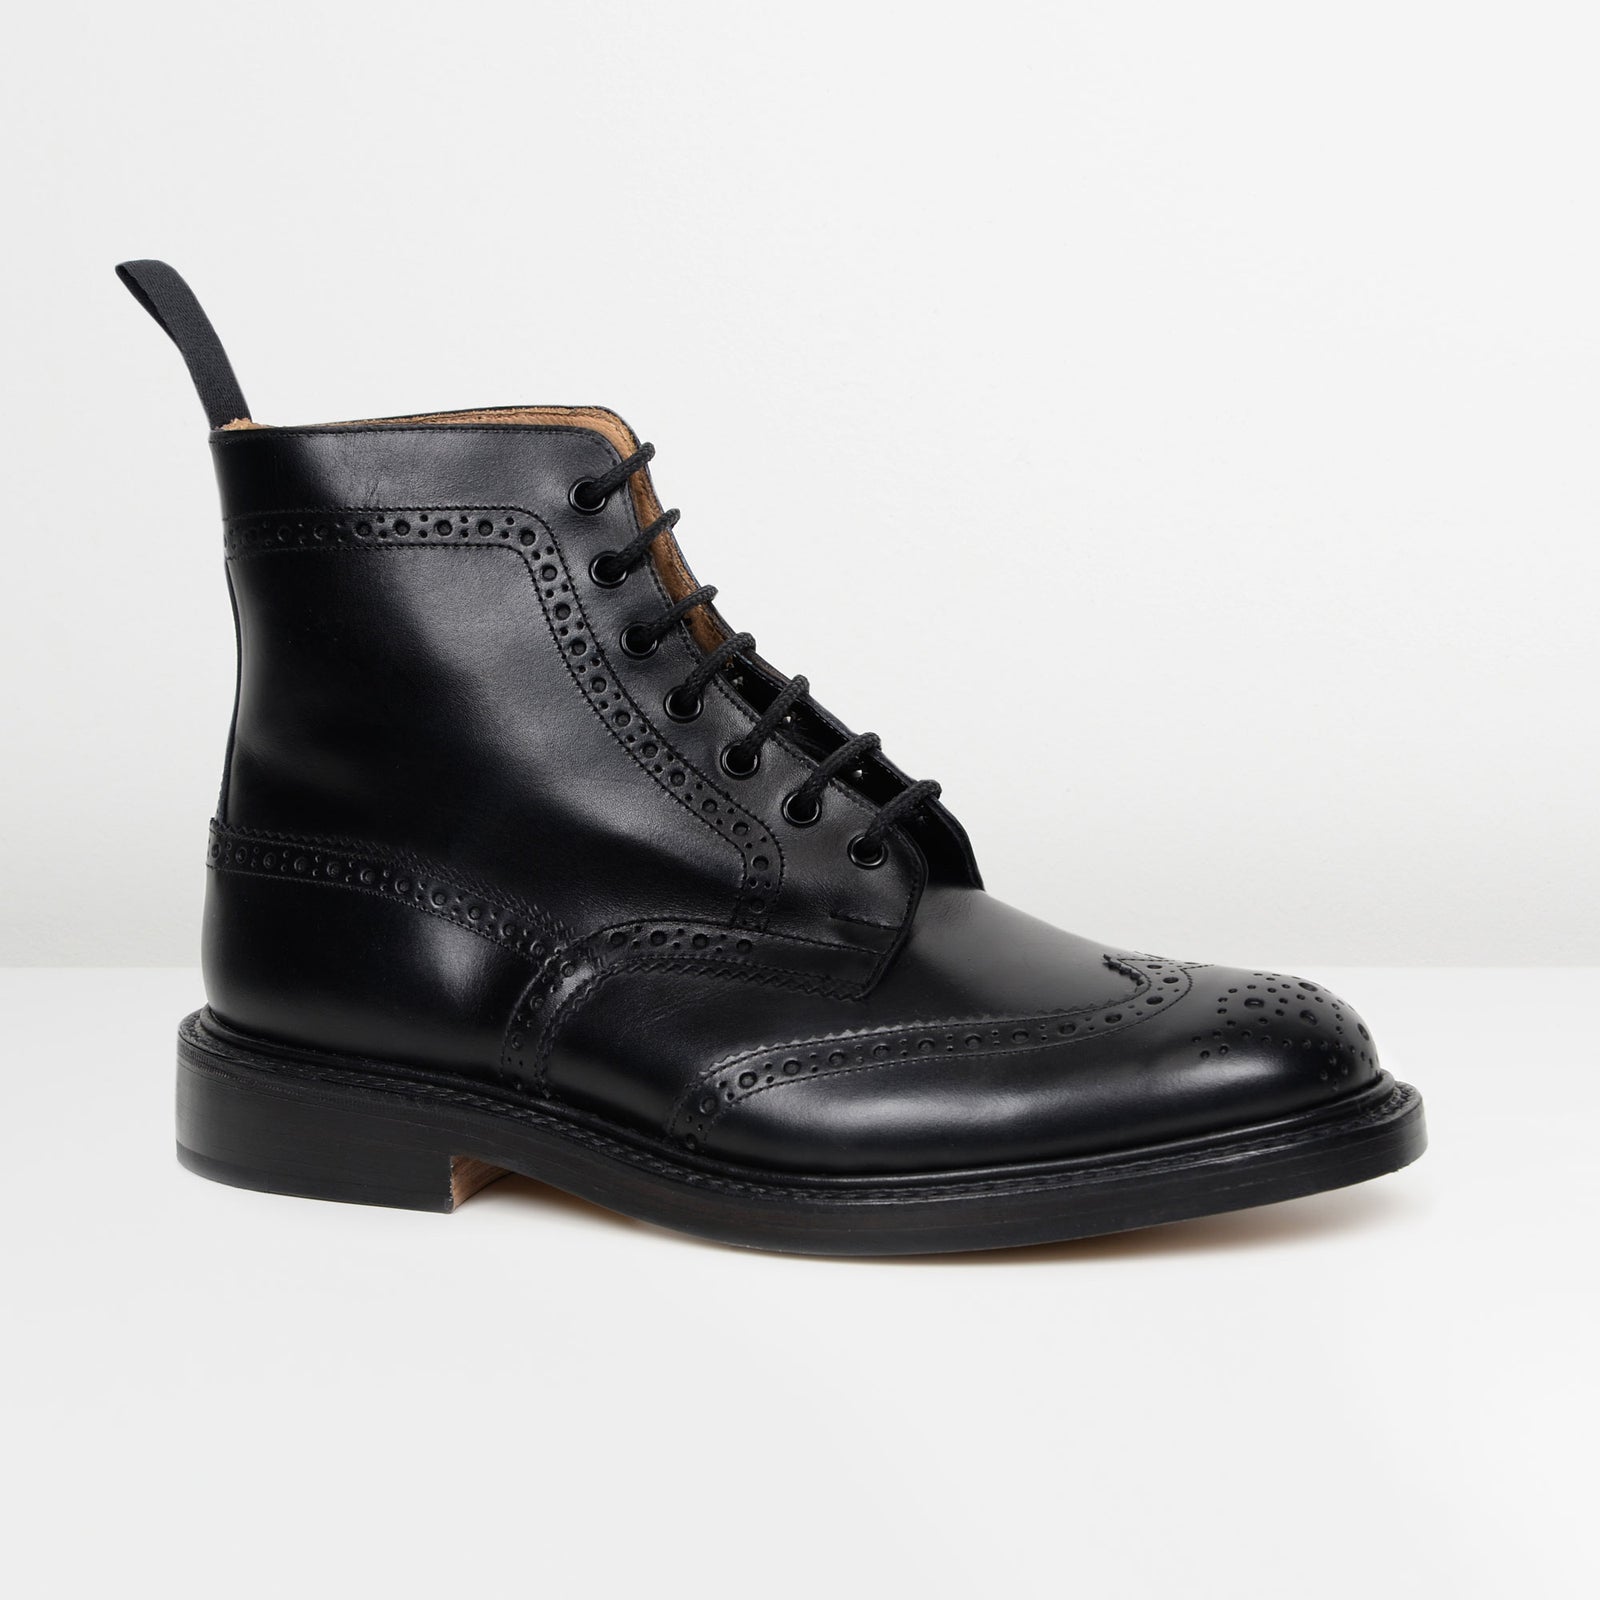 Black Stow 5634 Derby Brogue Boots